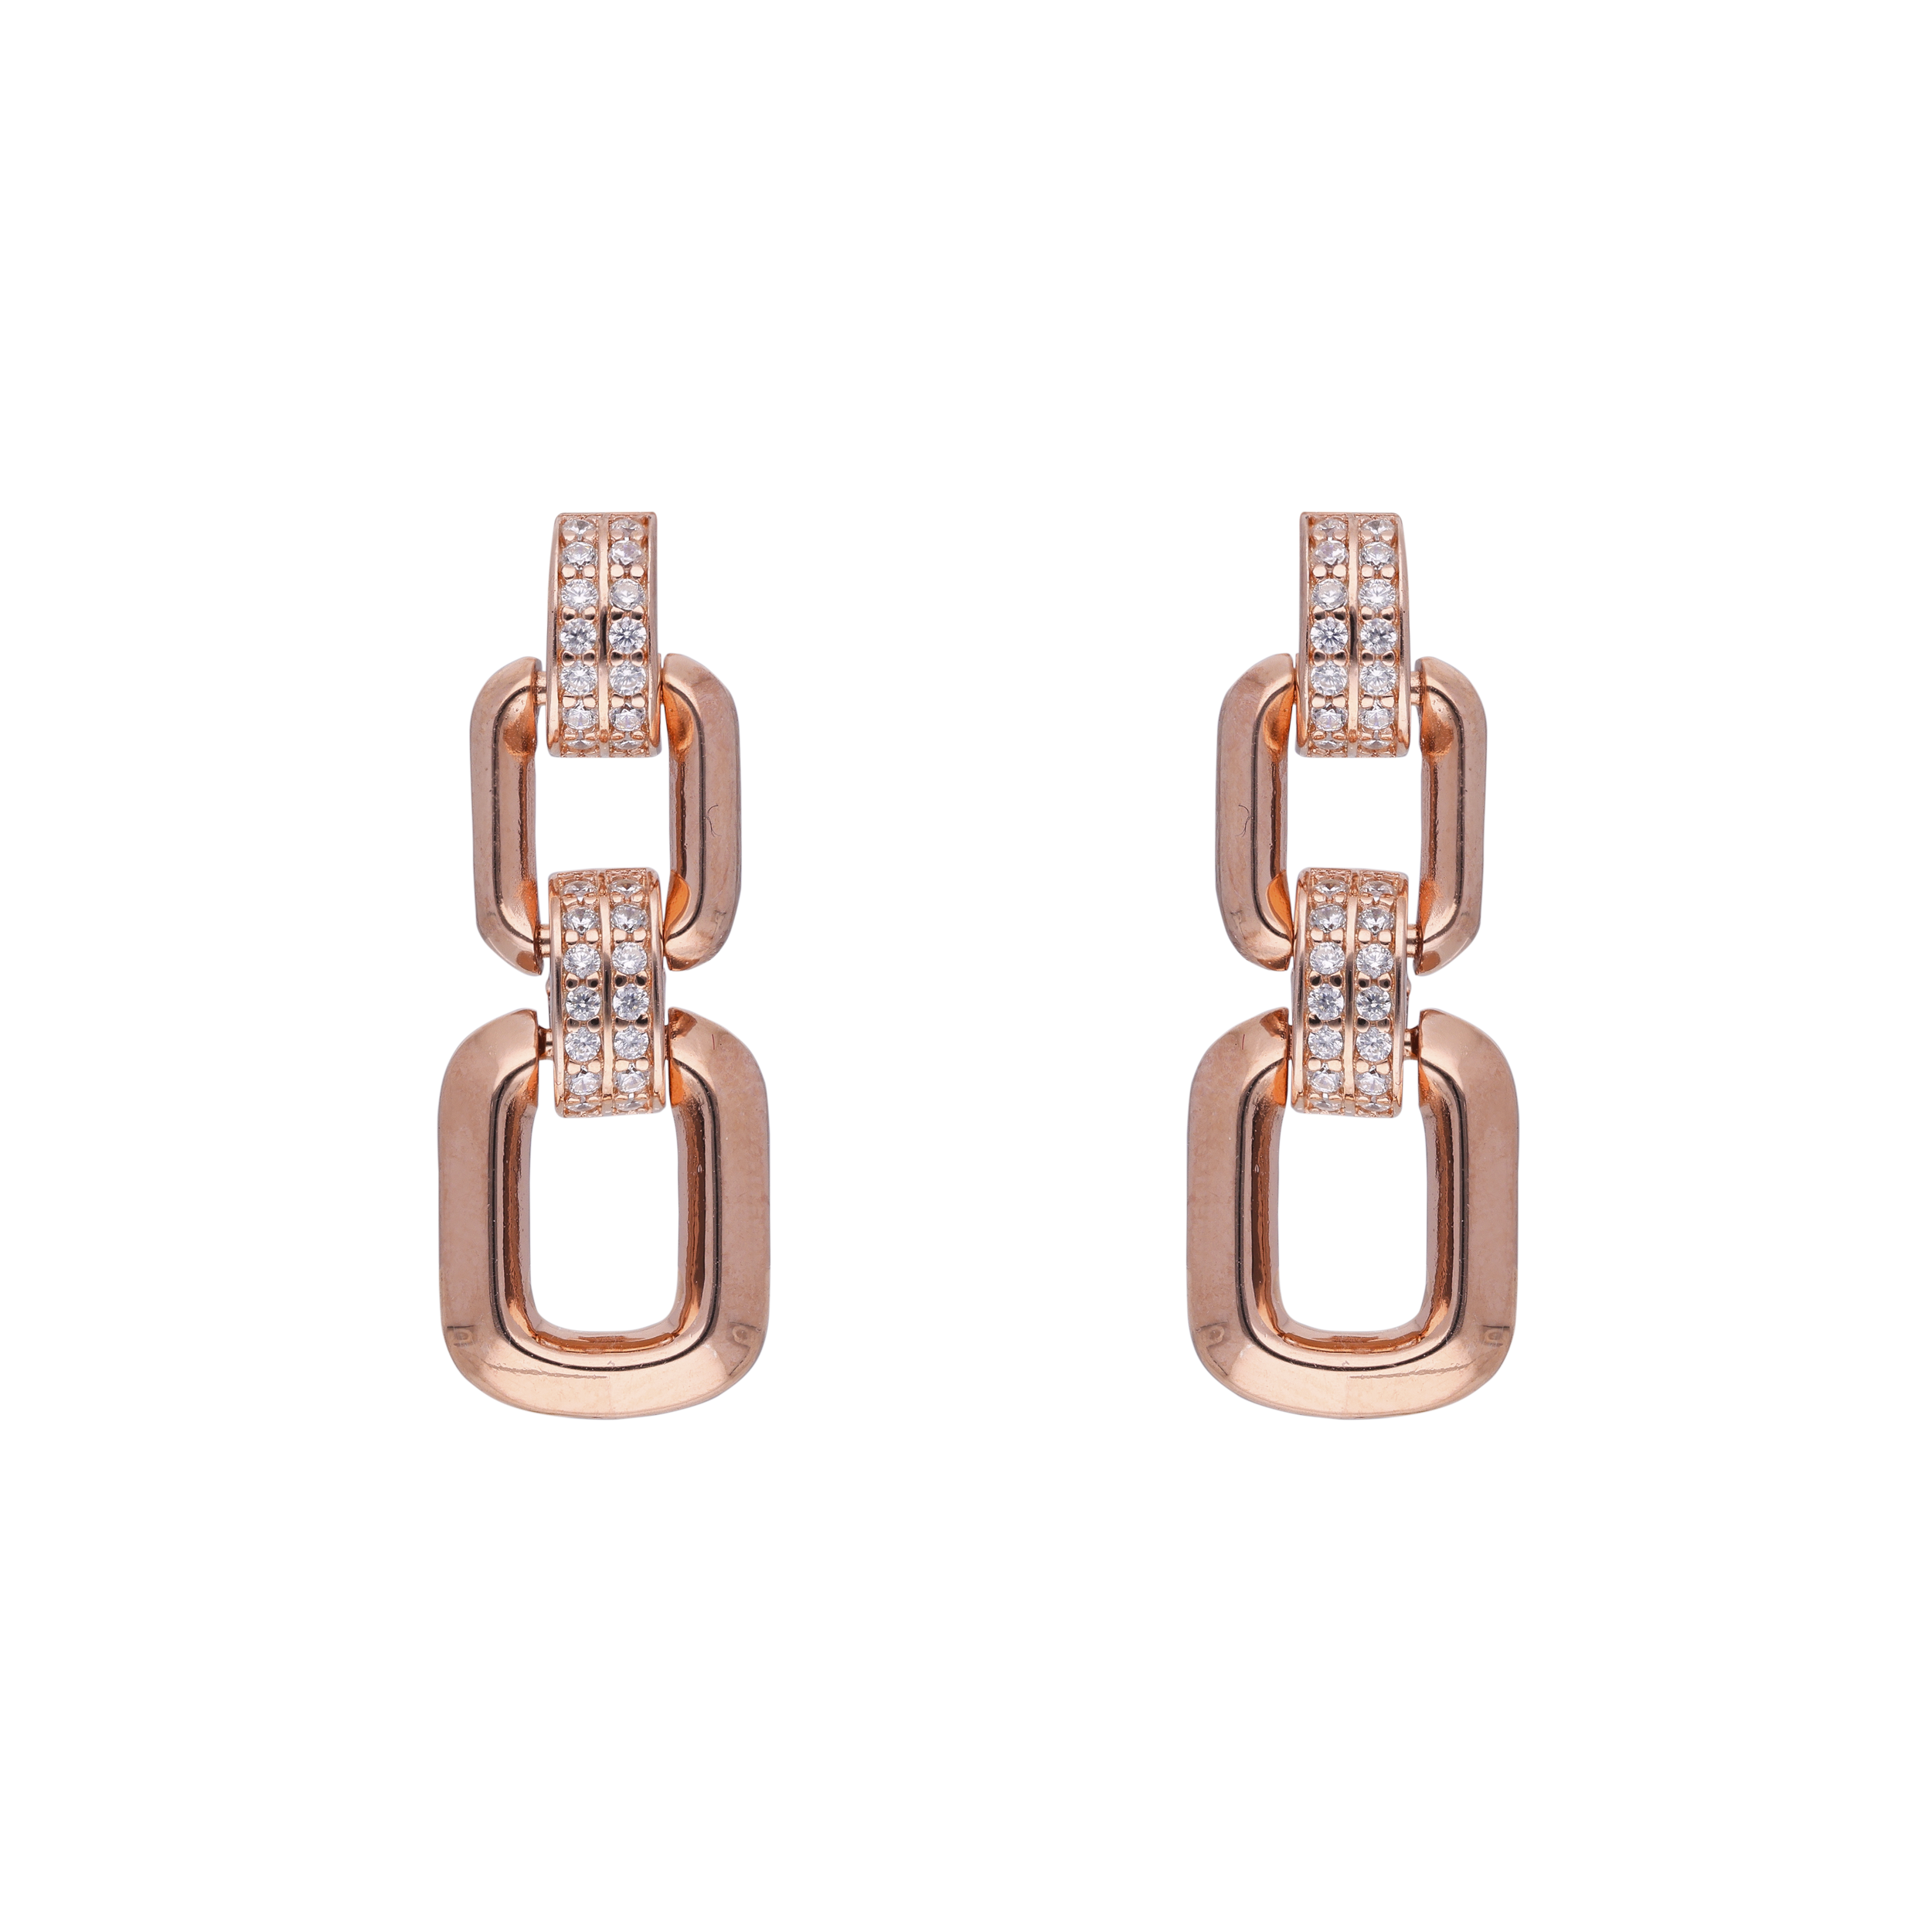 Chic Interlinked Rectangle Rose Gold Eardrops with Cubic Zirconia Accents | SKU : 0019889016, 0019889030, 0003111949 , 0003112007, 0003111963